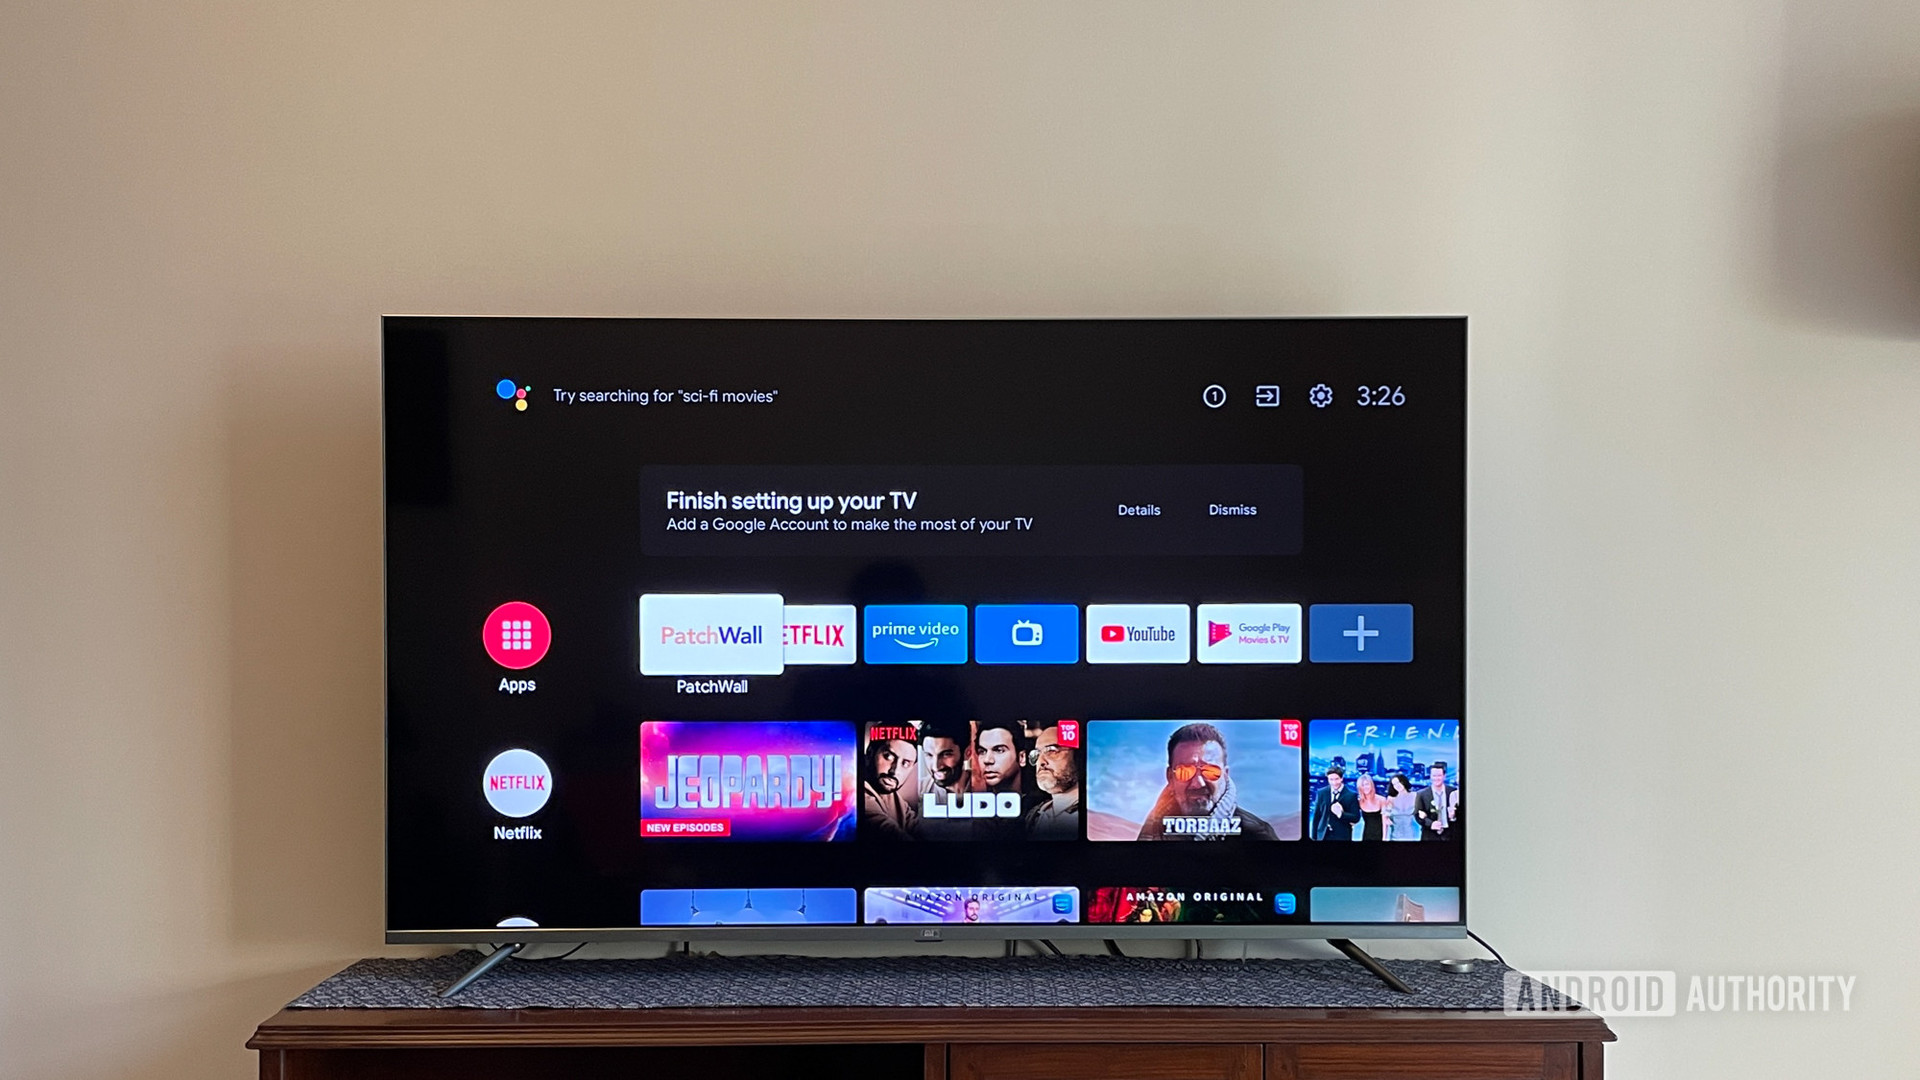 Mi QLED TV 4K with Android TV interface showing available apps